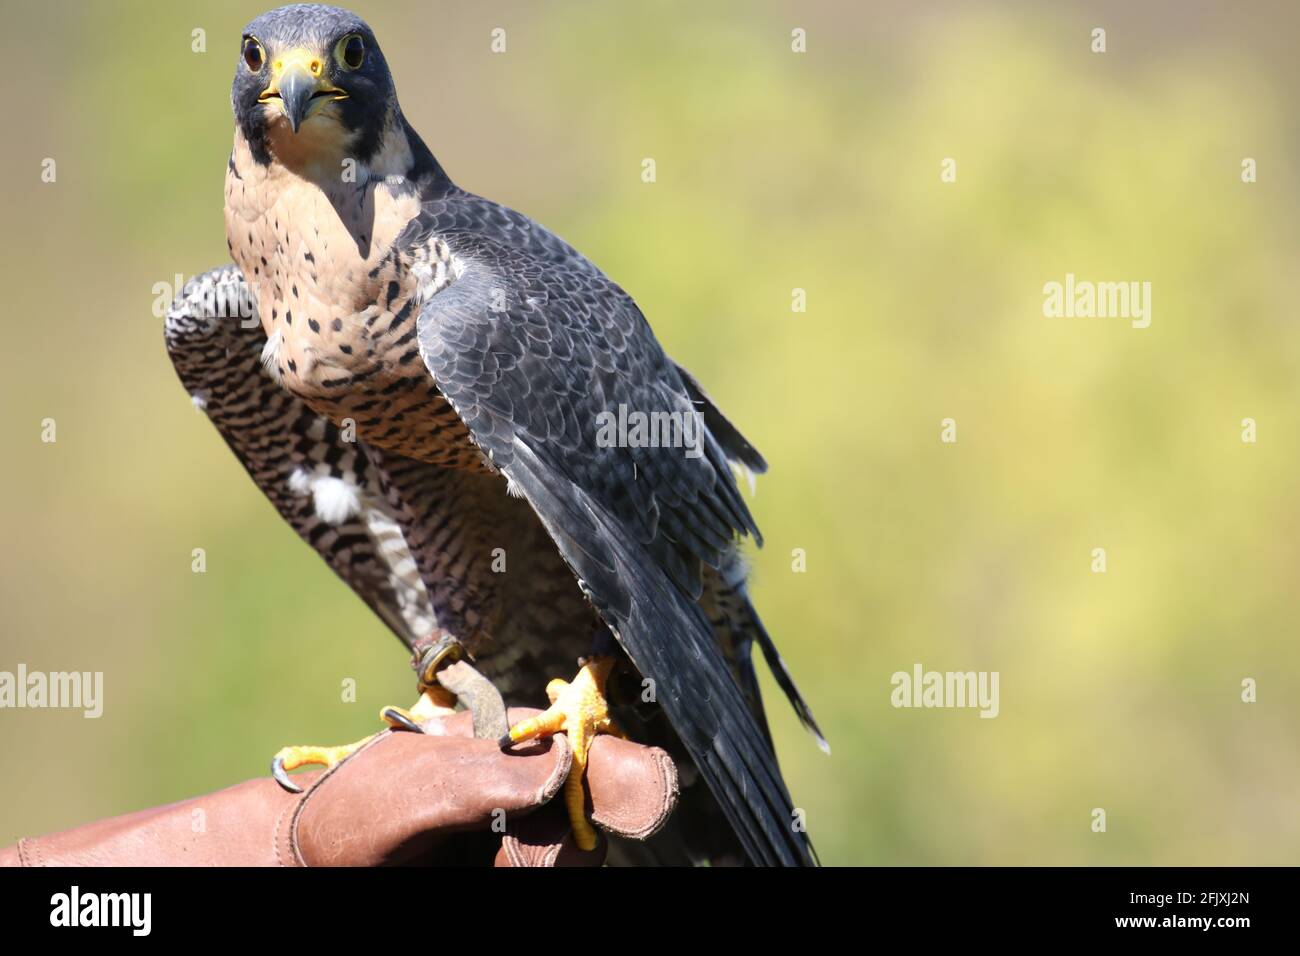 Beautiful peregrine falcon perched on falconer's protective leather glove Stock Photo